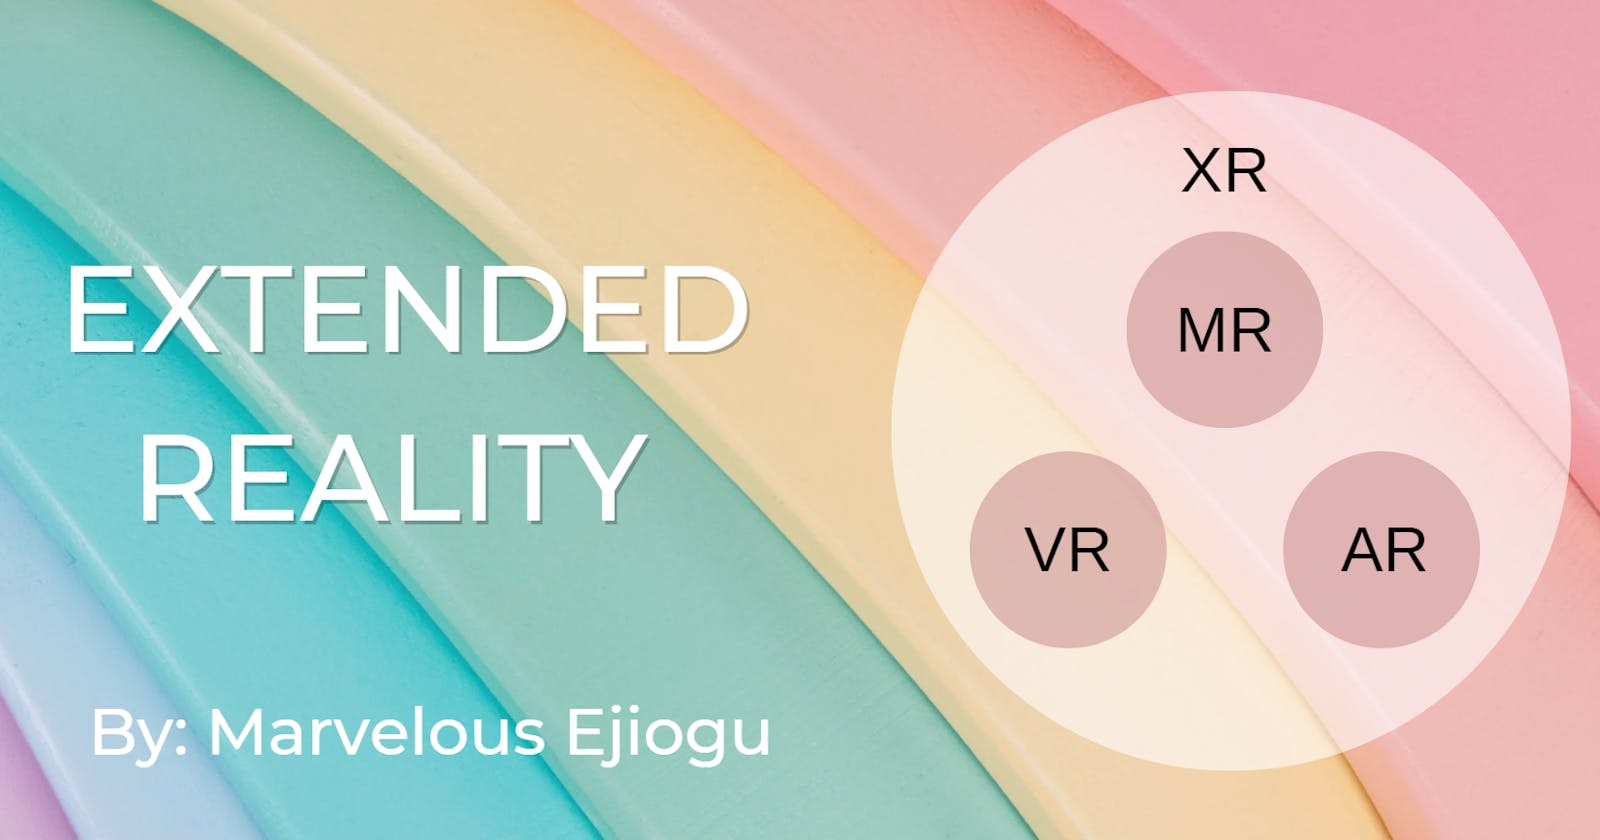 Exploring Extended Reality: An Exciting Guide for Better Understanding